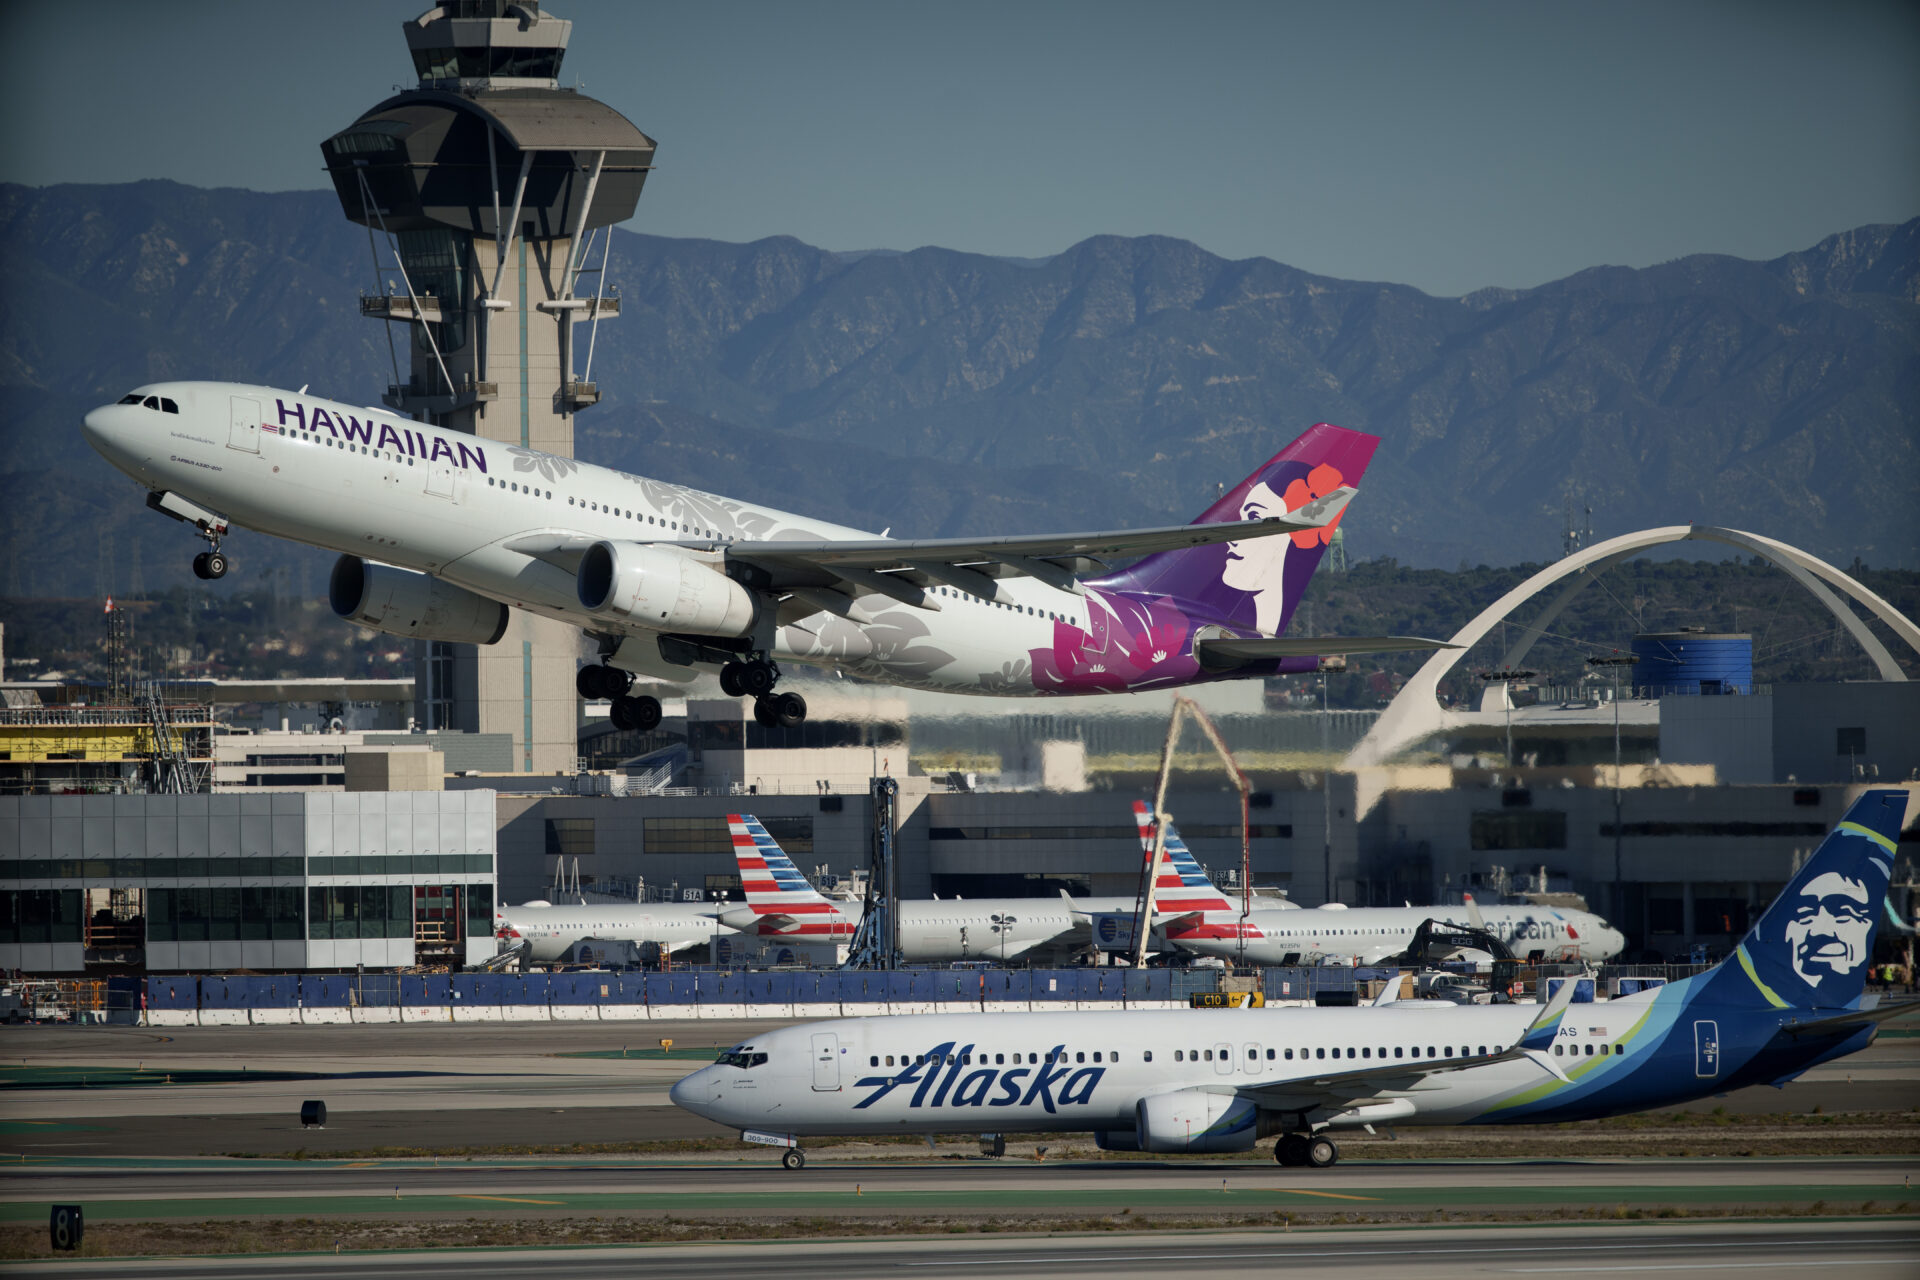 Hawaiian Airlines plane takes off while Alaska Airlines plane sits on tarmac